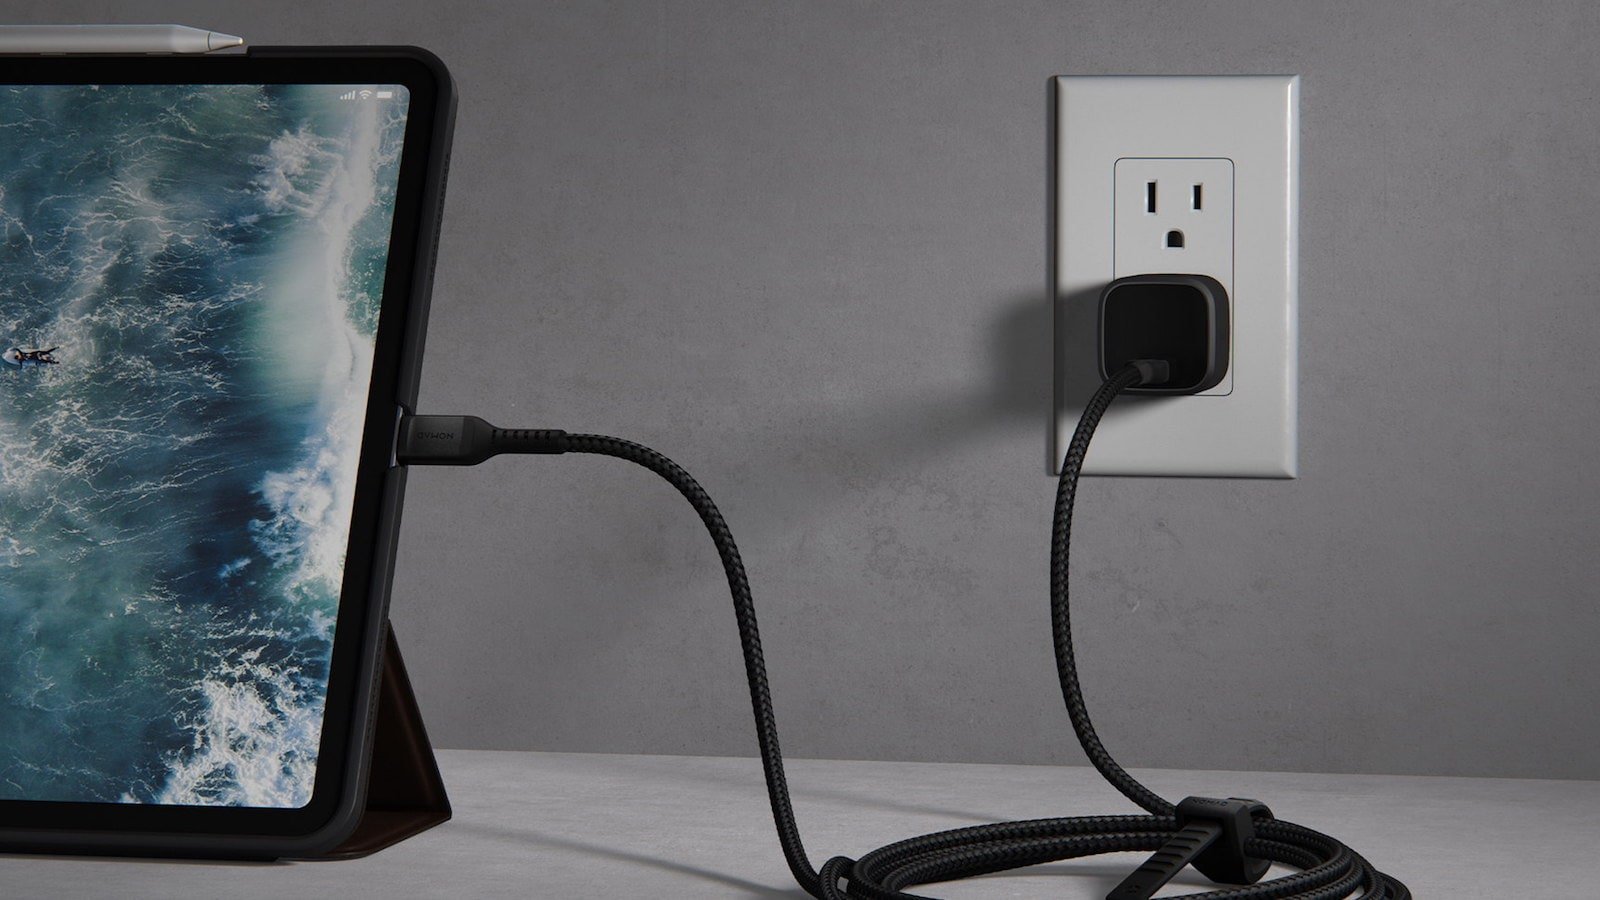 Nomad 20W USB-C Power Adapter is portable and powerful for convenient charging on the go